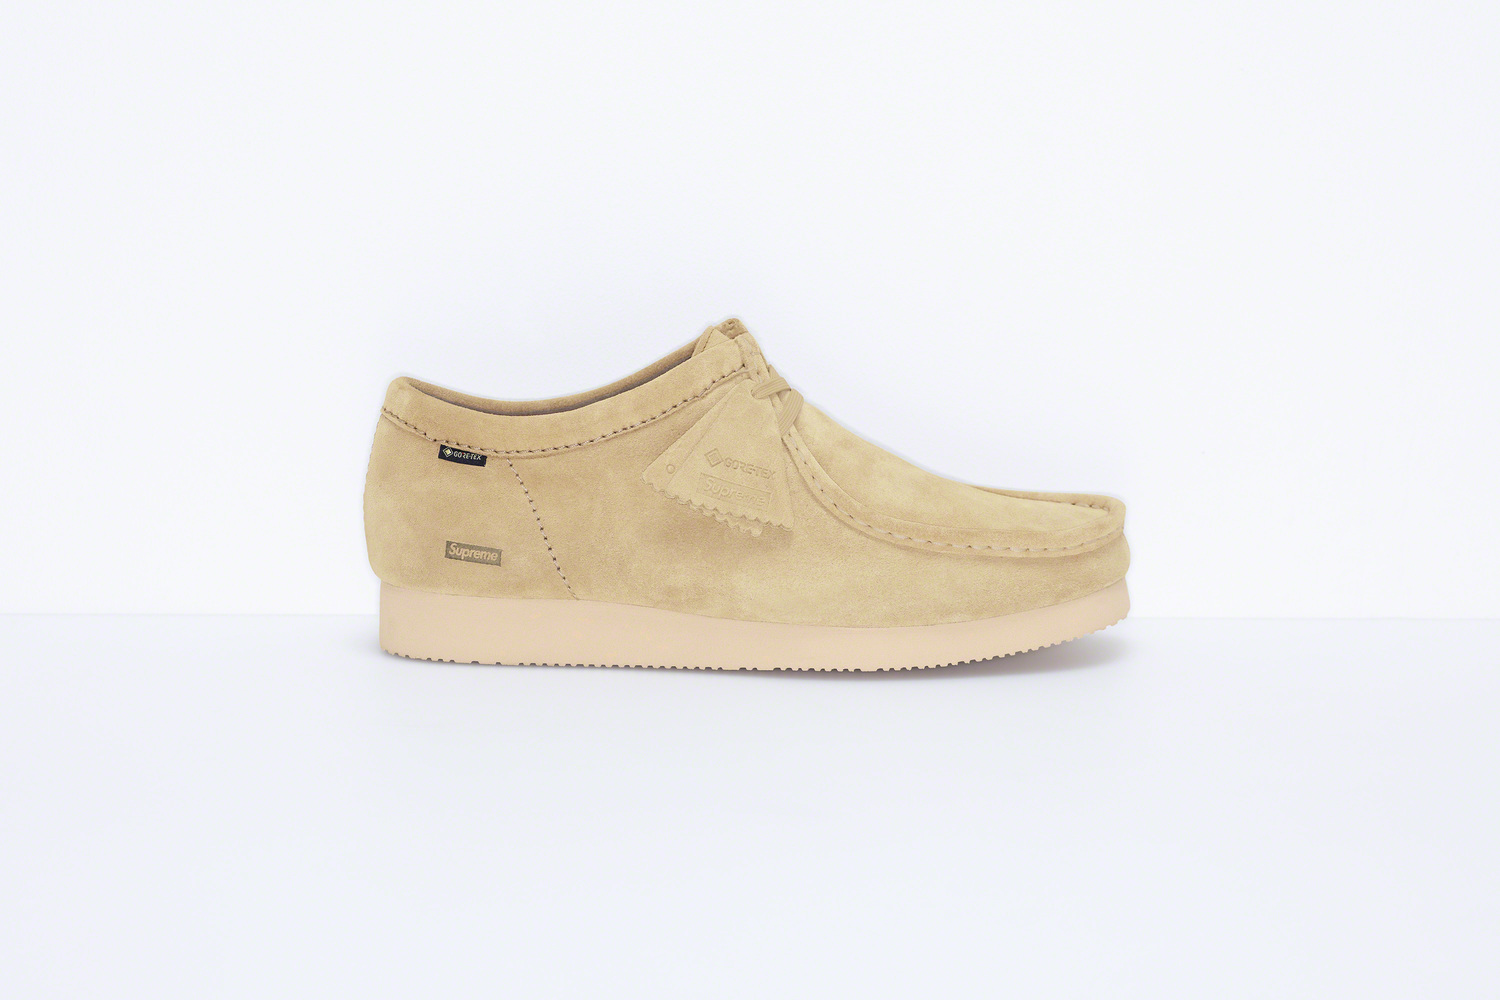 SUPREME Unveils Waterproof Clarks Wallabee Collection [Photos]